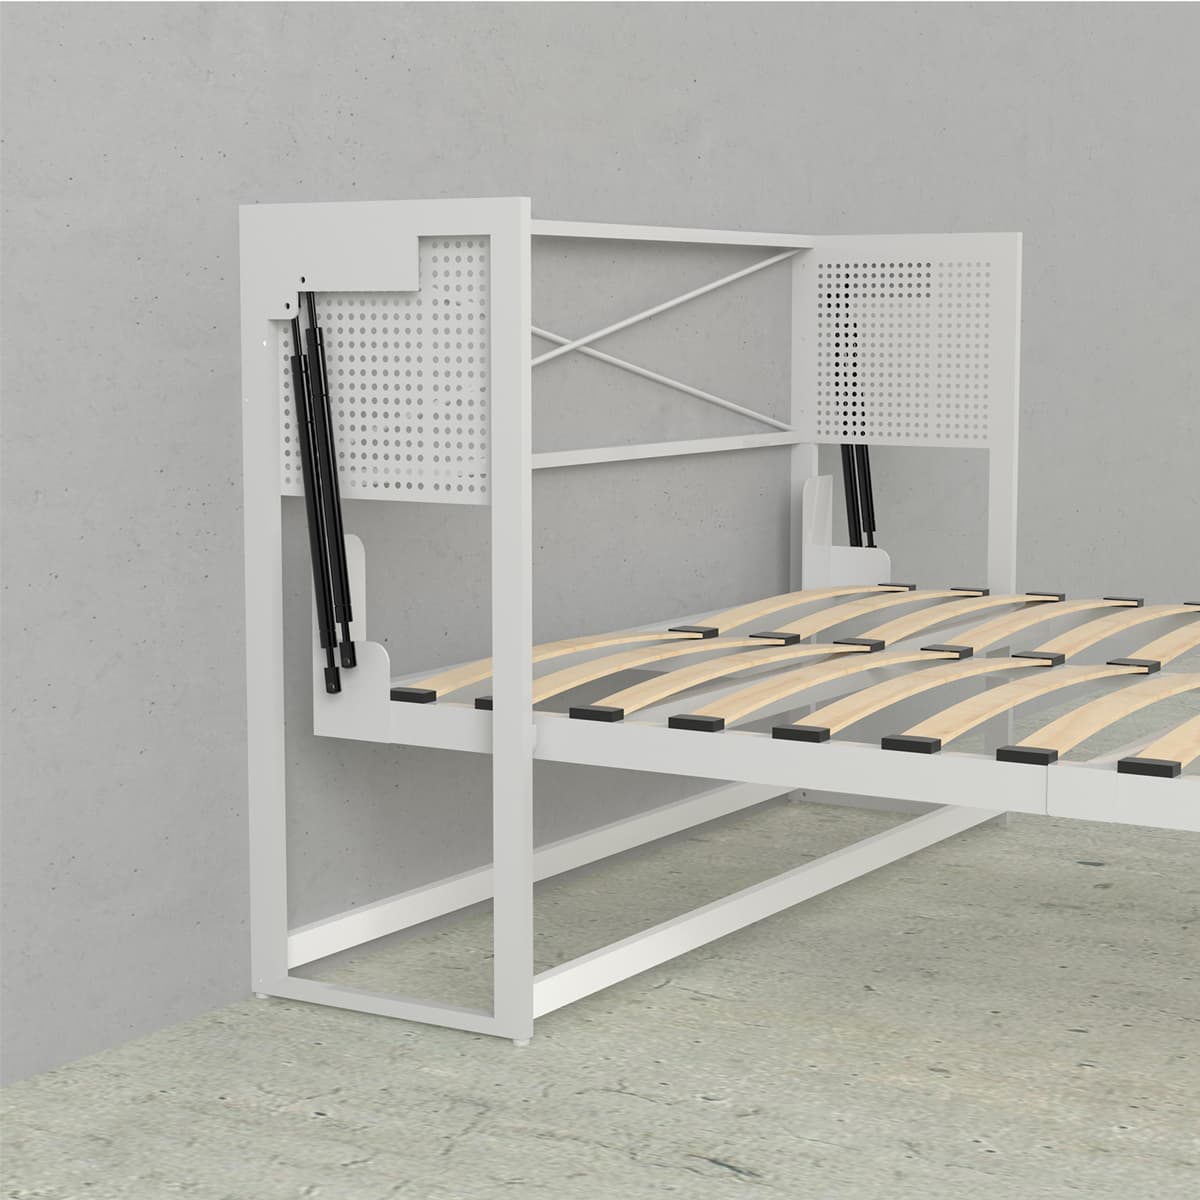 Steel frame of the adonis queen murphy bed with storage euroslats quad piston dual stage 